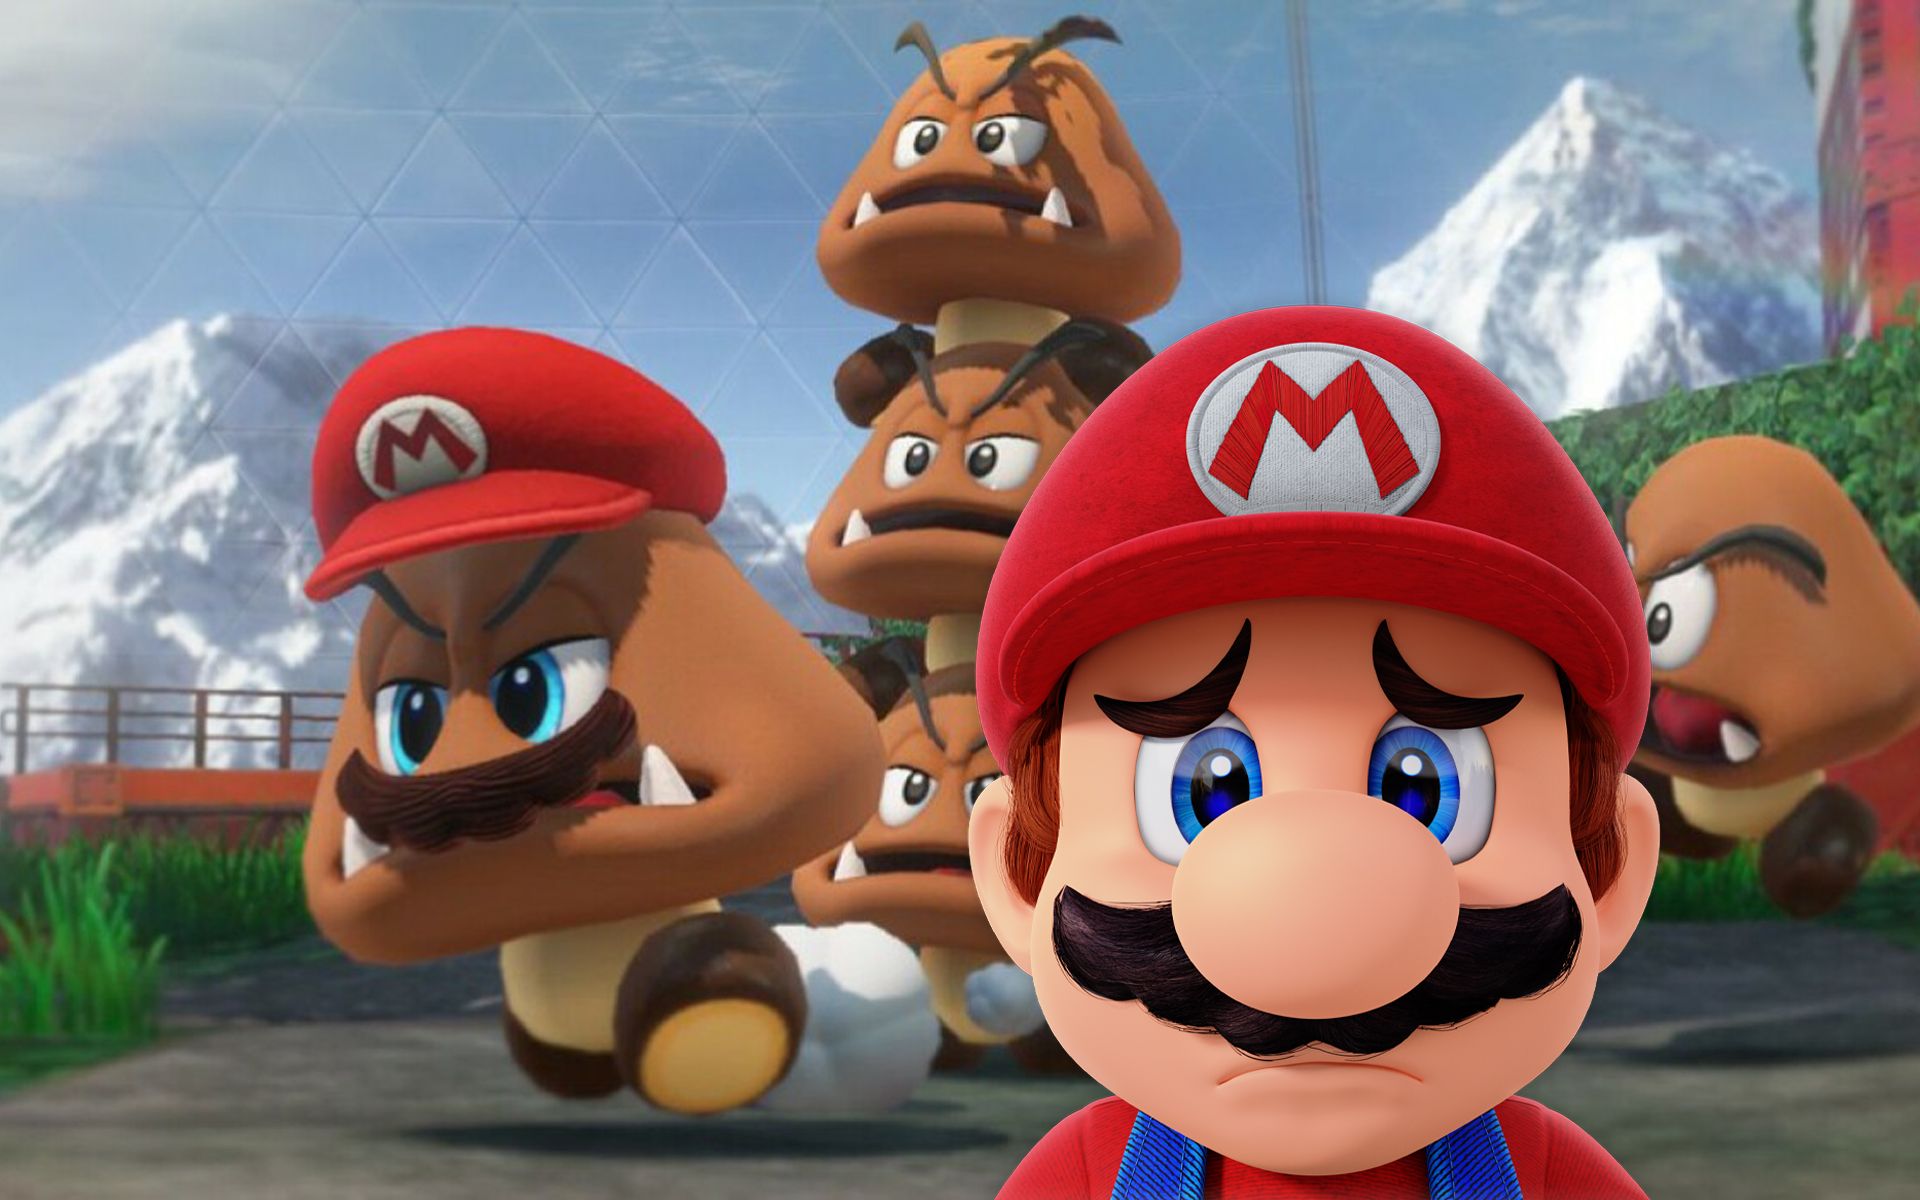 Mario Movie Delayed, Director Scrambles To Find New Song For Goomba Dance Segment After Sonic 2 Snags "Uptown Funk"